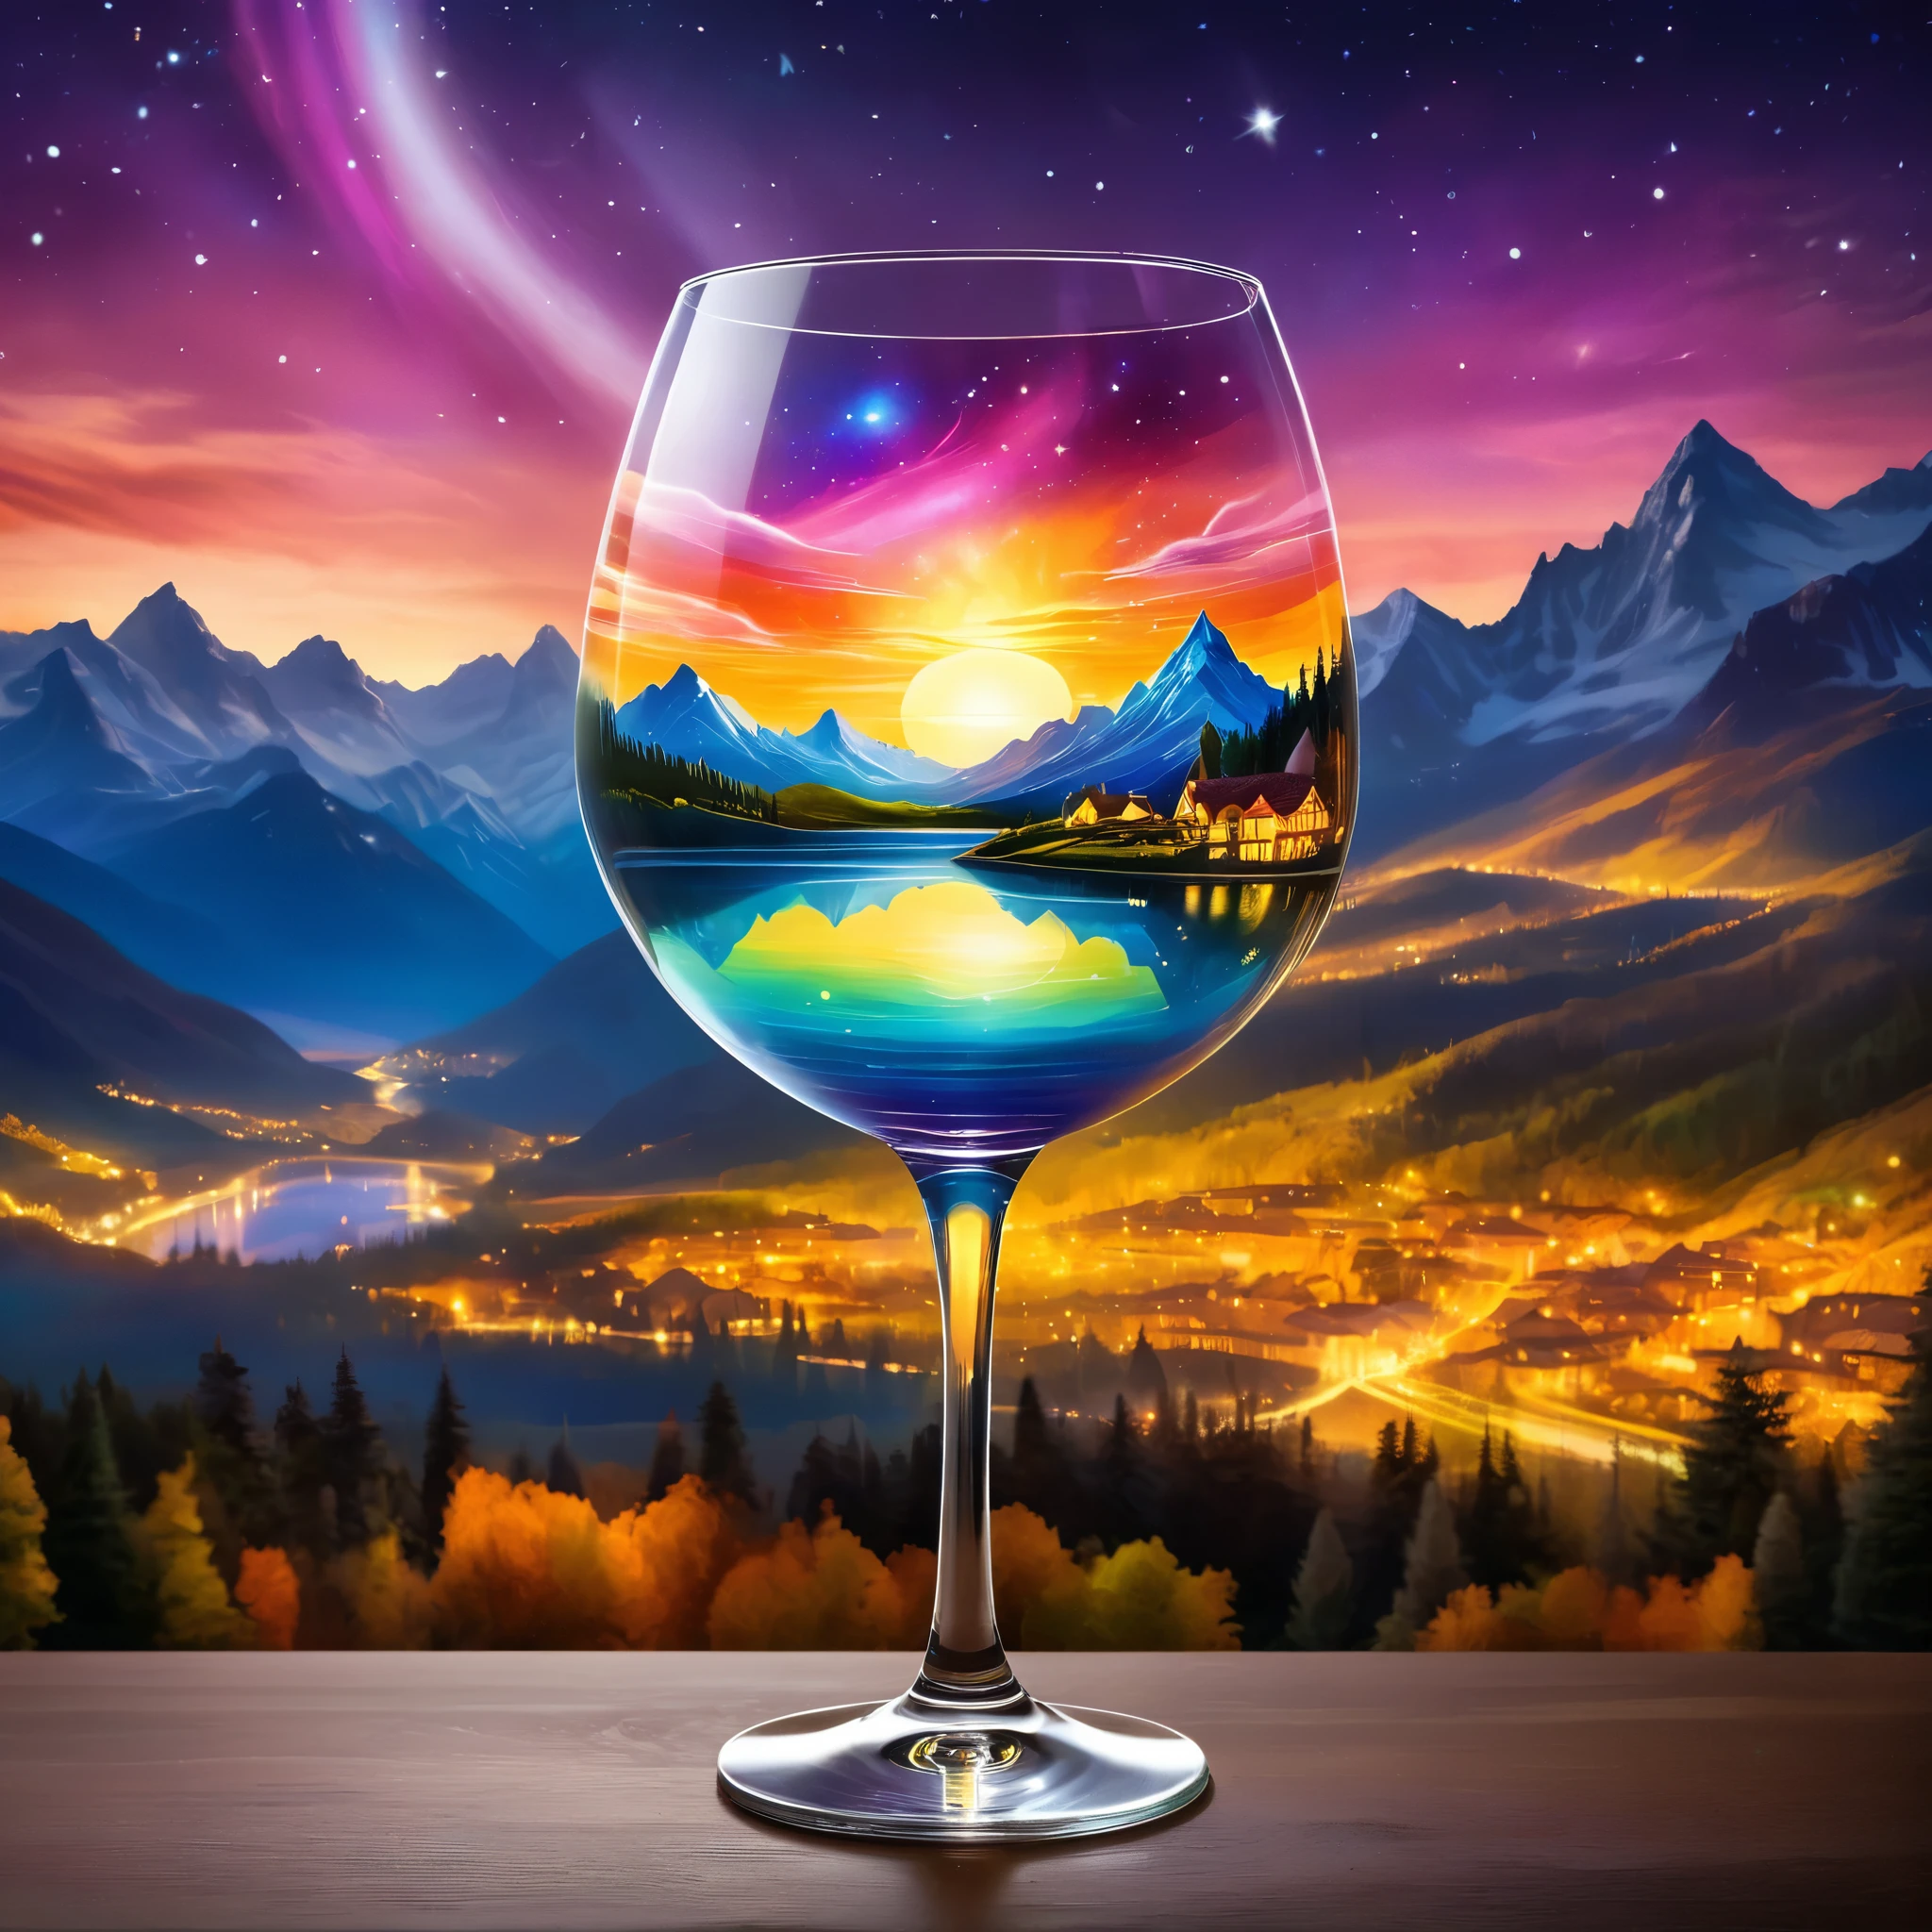 Create a celestial scene within a wine glass, featuring a surreal landscape with mountains and an aurora sky. The background includes a glowing sunset and cityscape. The style should be fantasy with ethereal elements. Hyper realistic photo, super vibrant colors, 16k